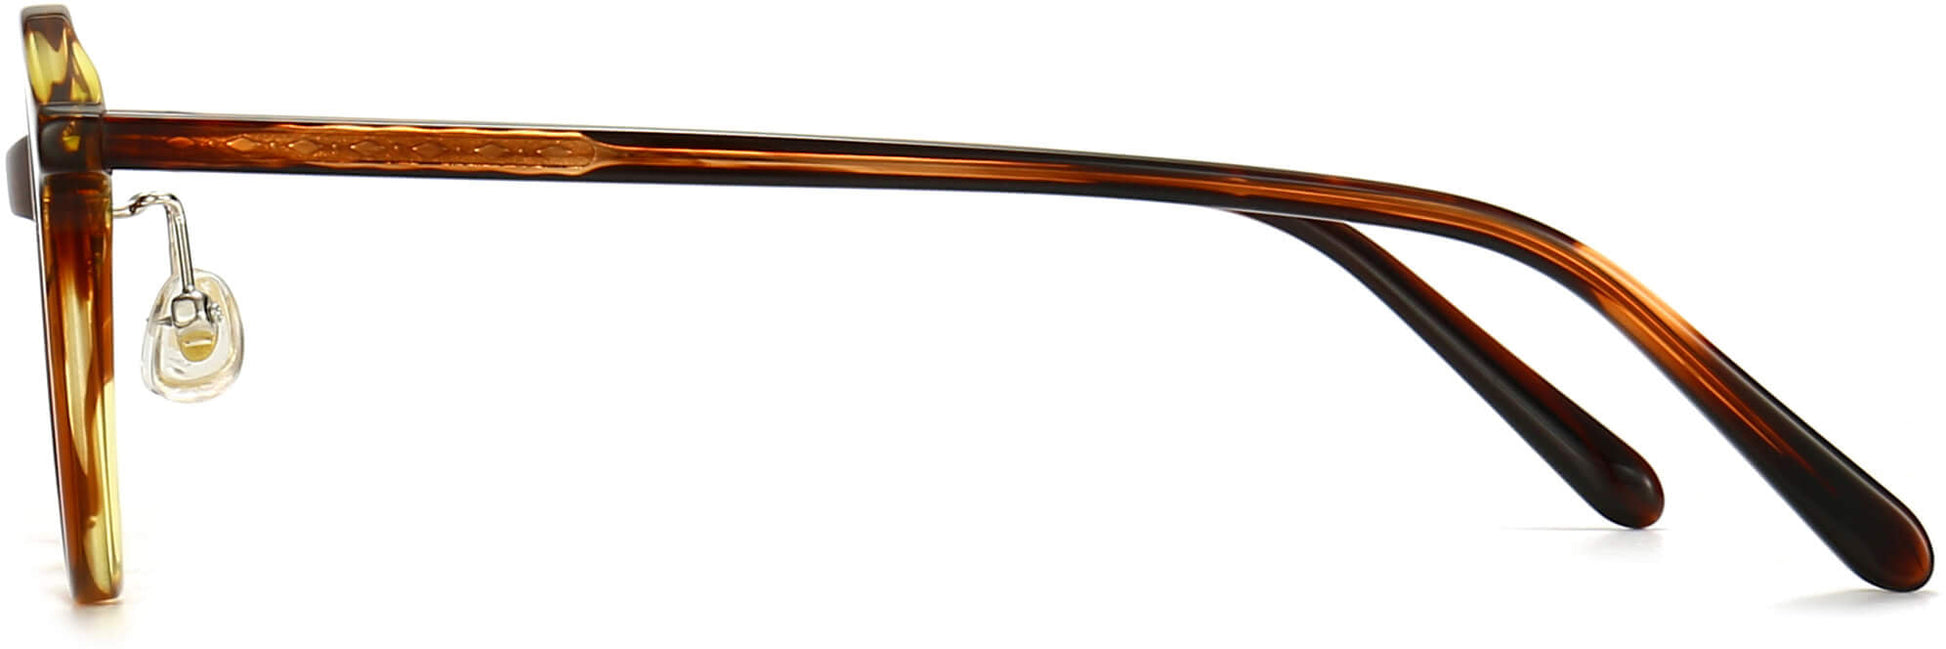 Liberty Round Tortoise Eyeglasses from ANRRI, side view